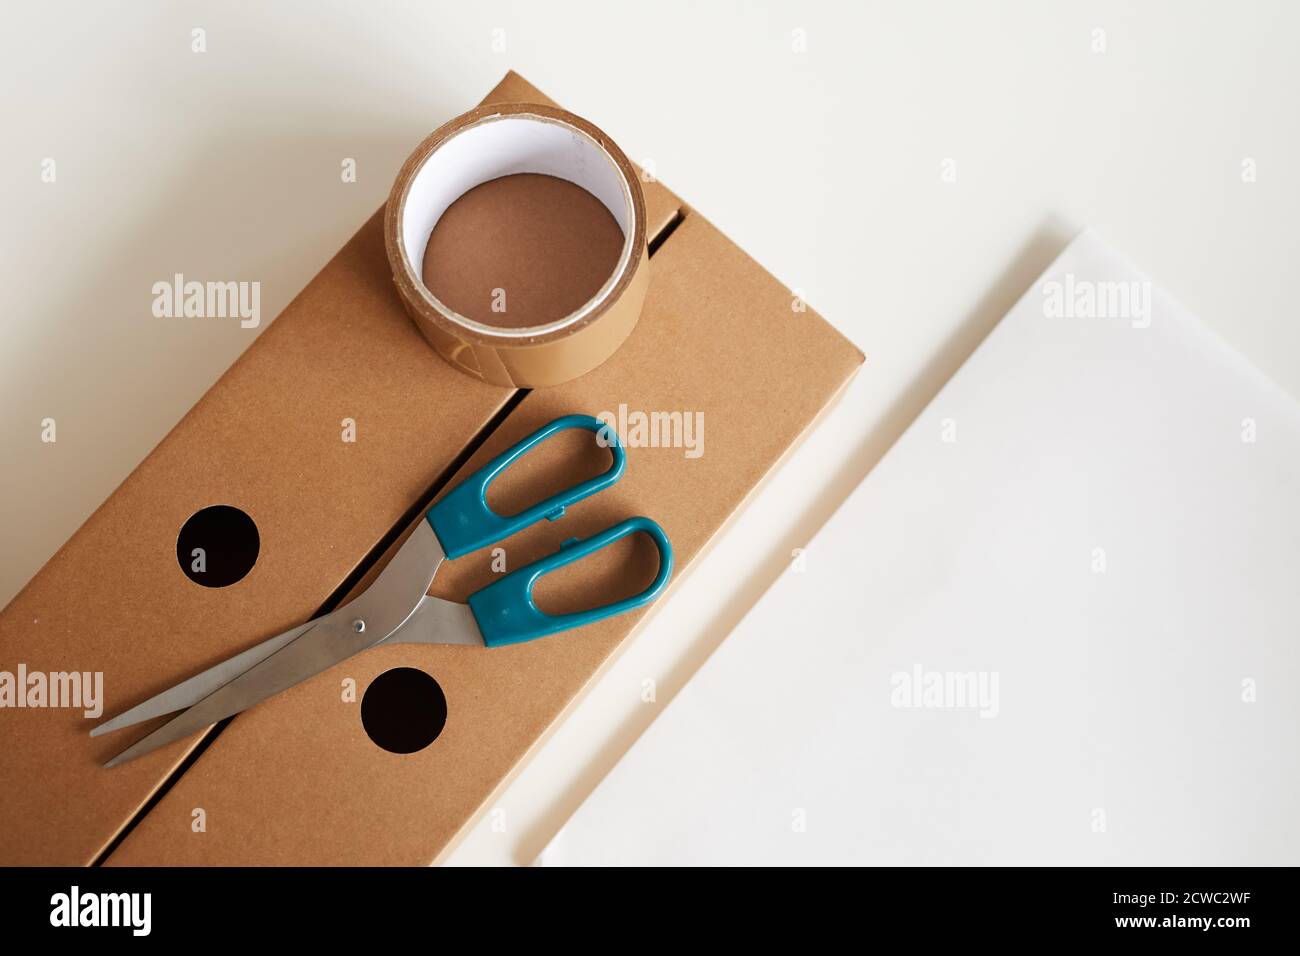 Grif-wrapping paper, scissors, sticky tape and decorations Stock Photo -  Alamy